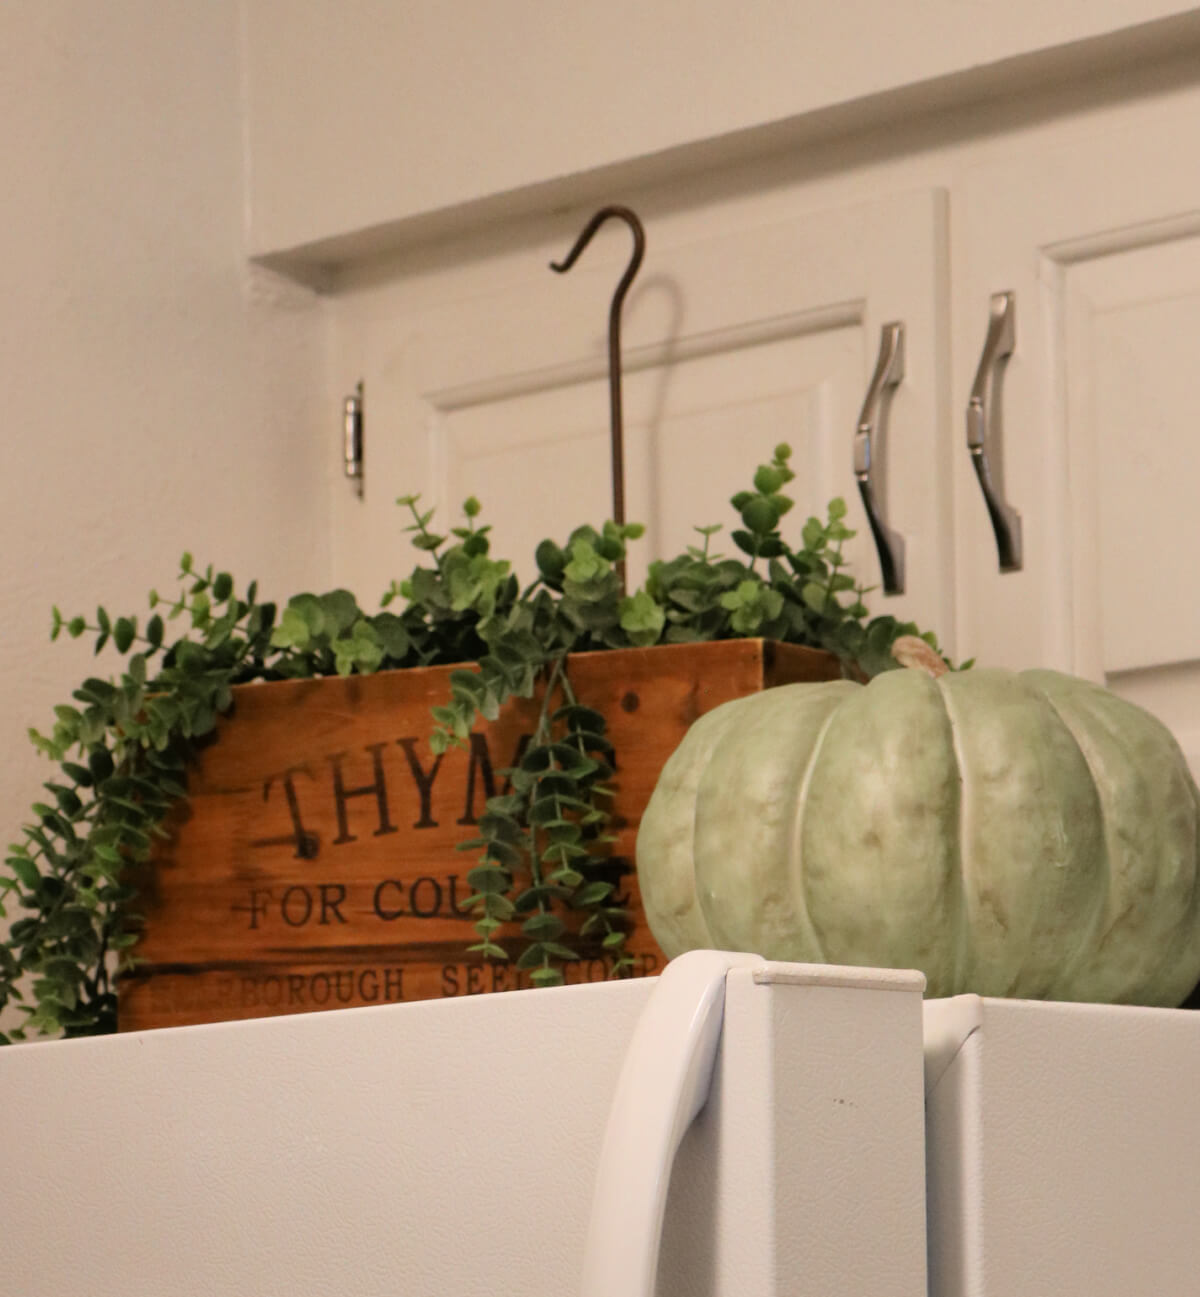 A green pumpkin and Thyme box of greenery atop the refrigerator